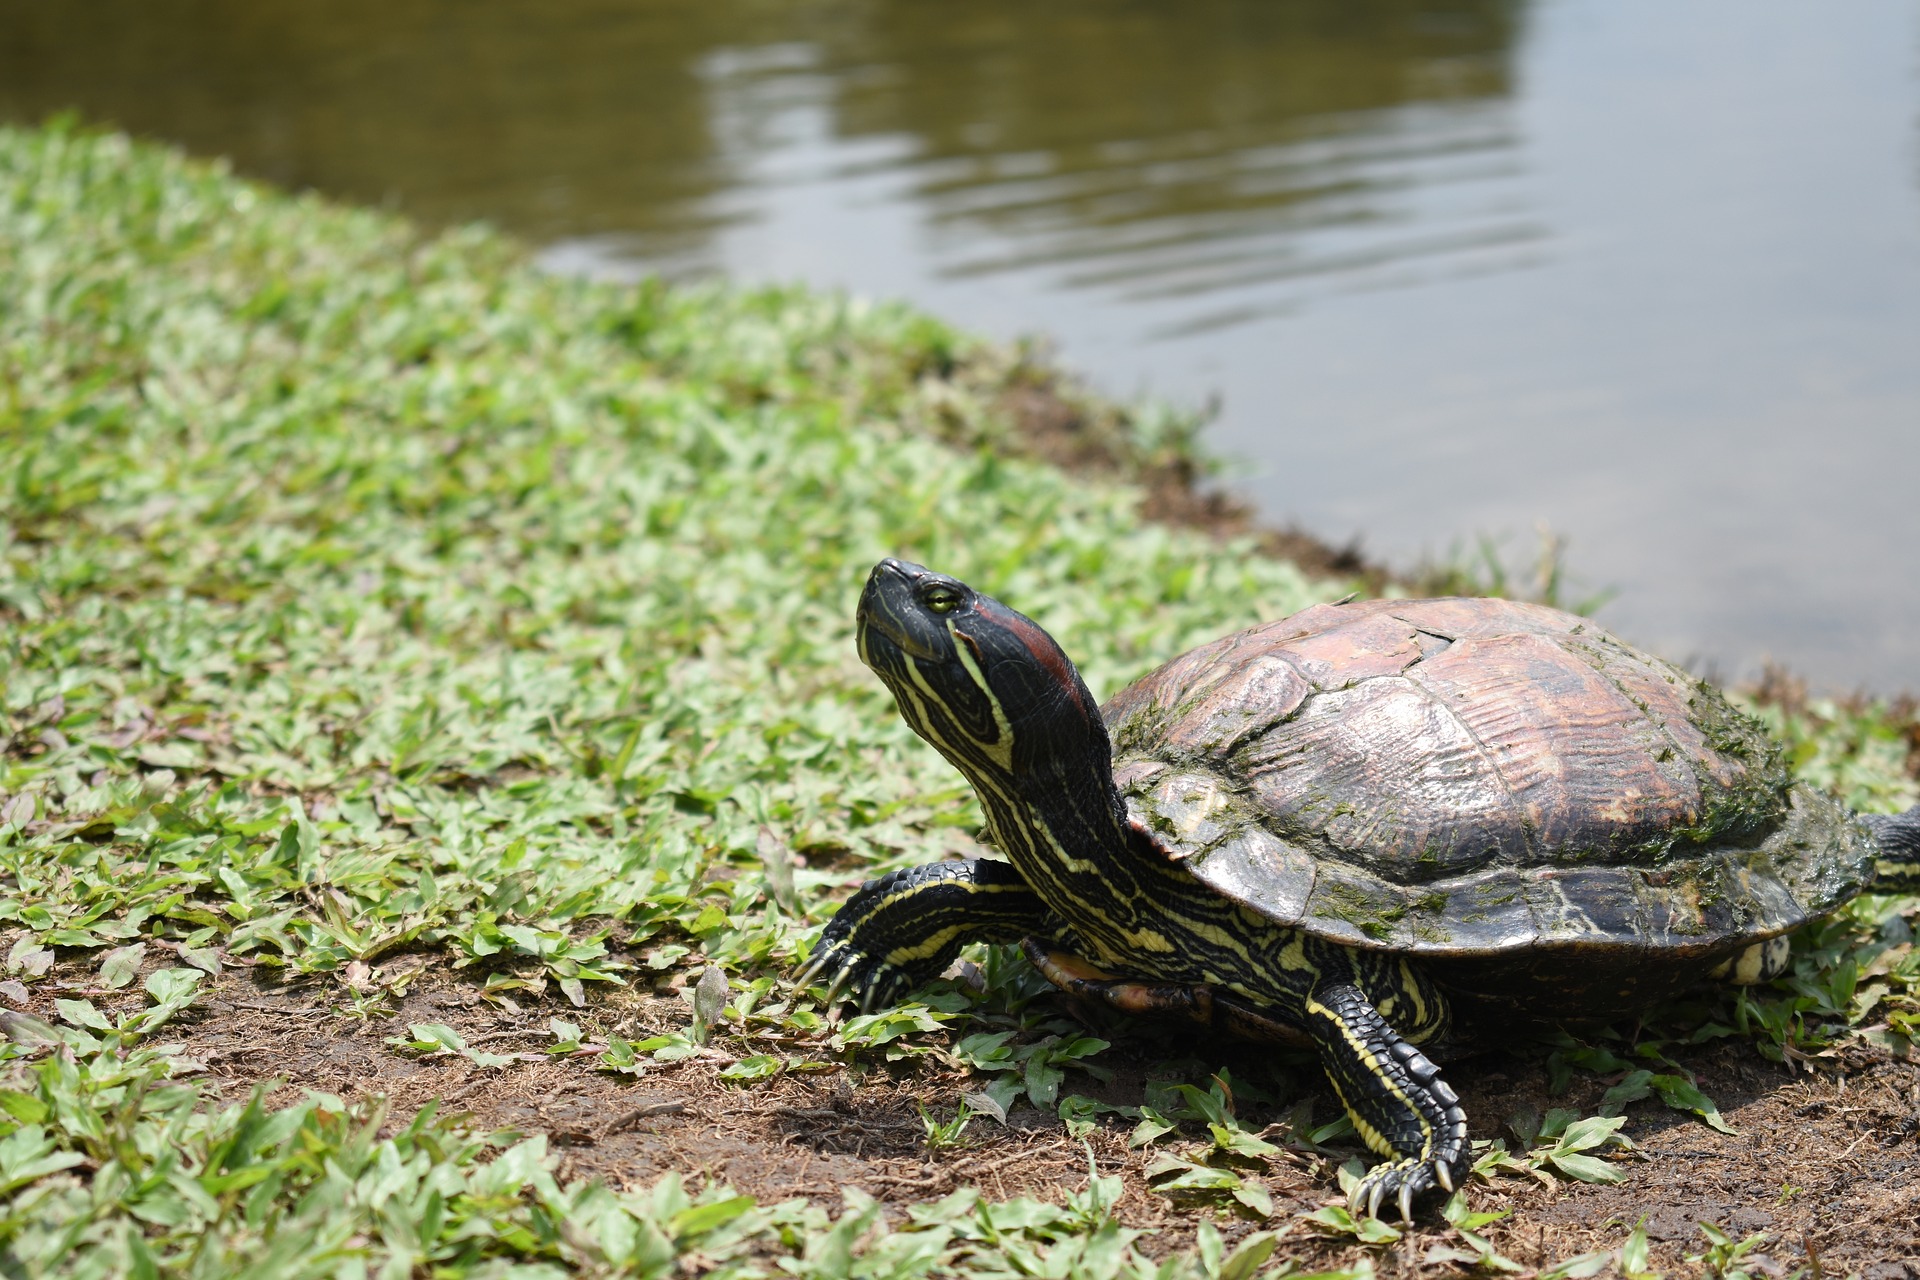 Red-eared slider turtle